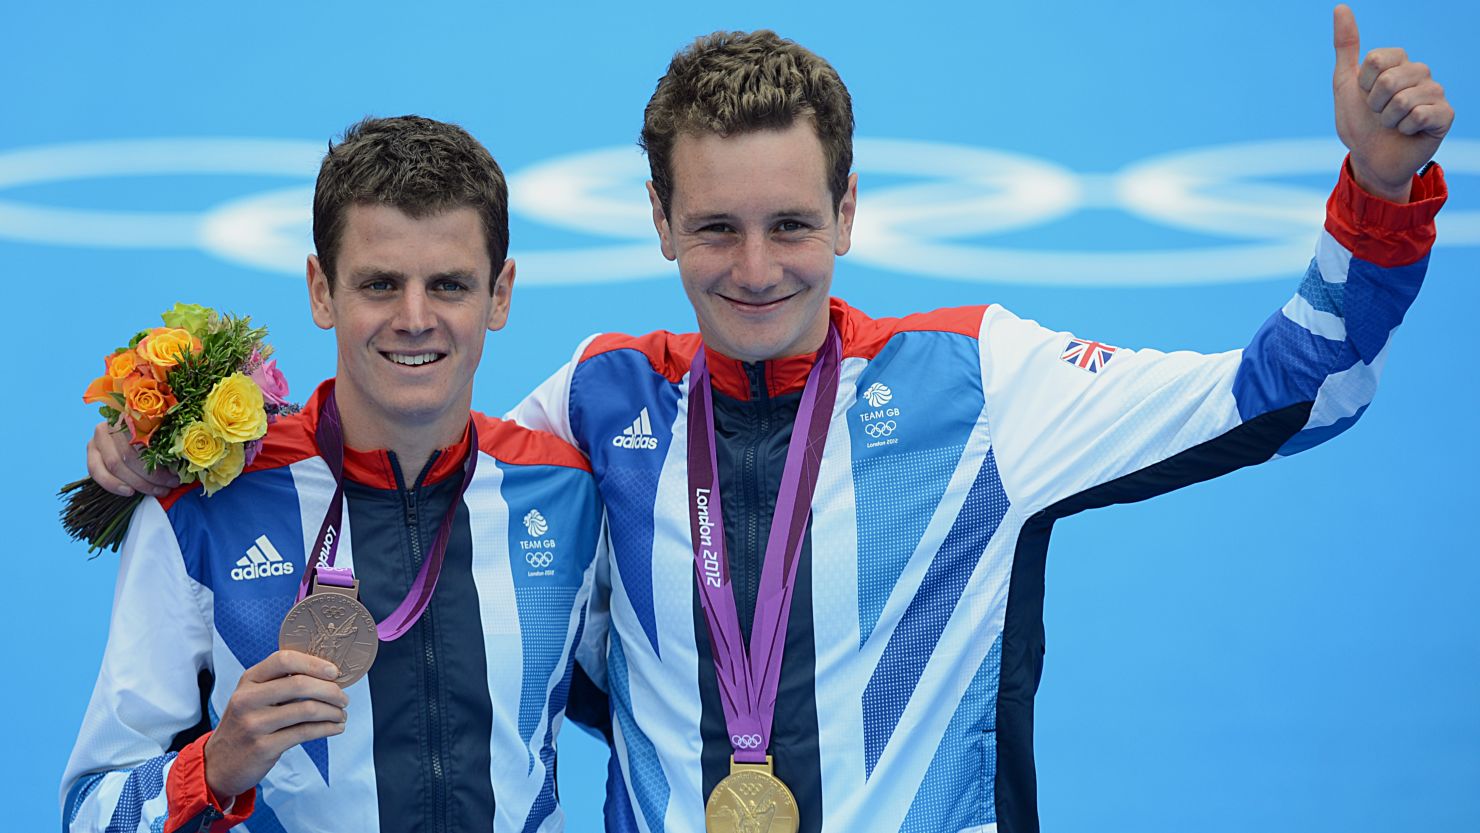 Alistair Brownlee (R) and brother Jonny pose with their medals after the men's triathlon